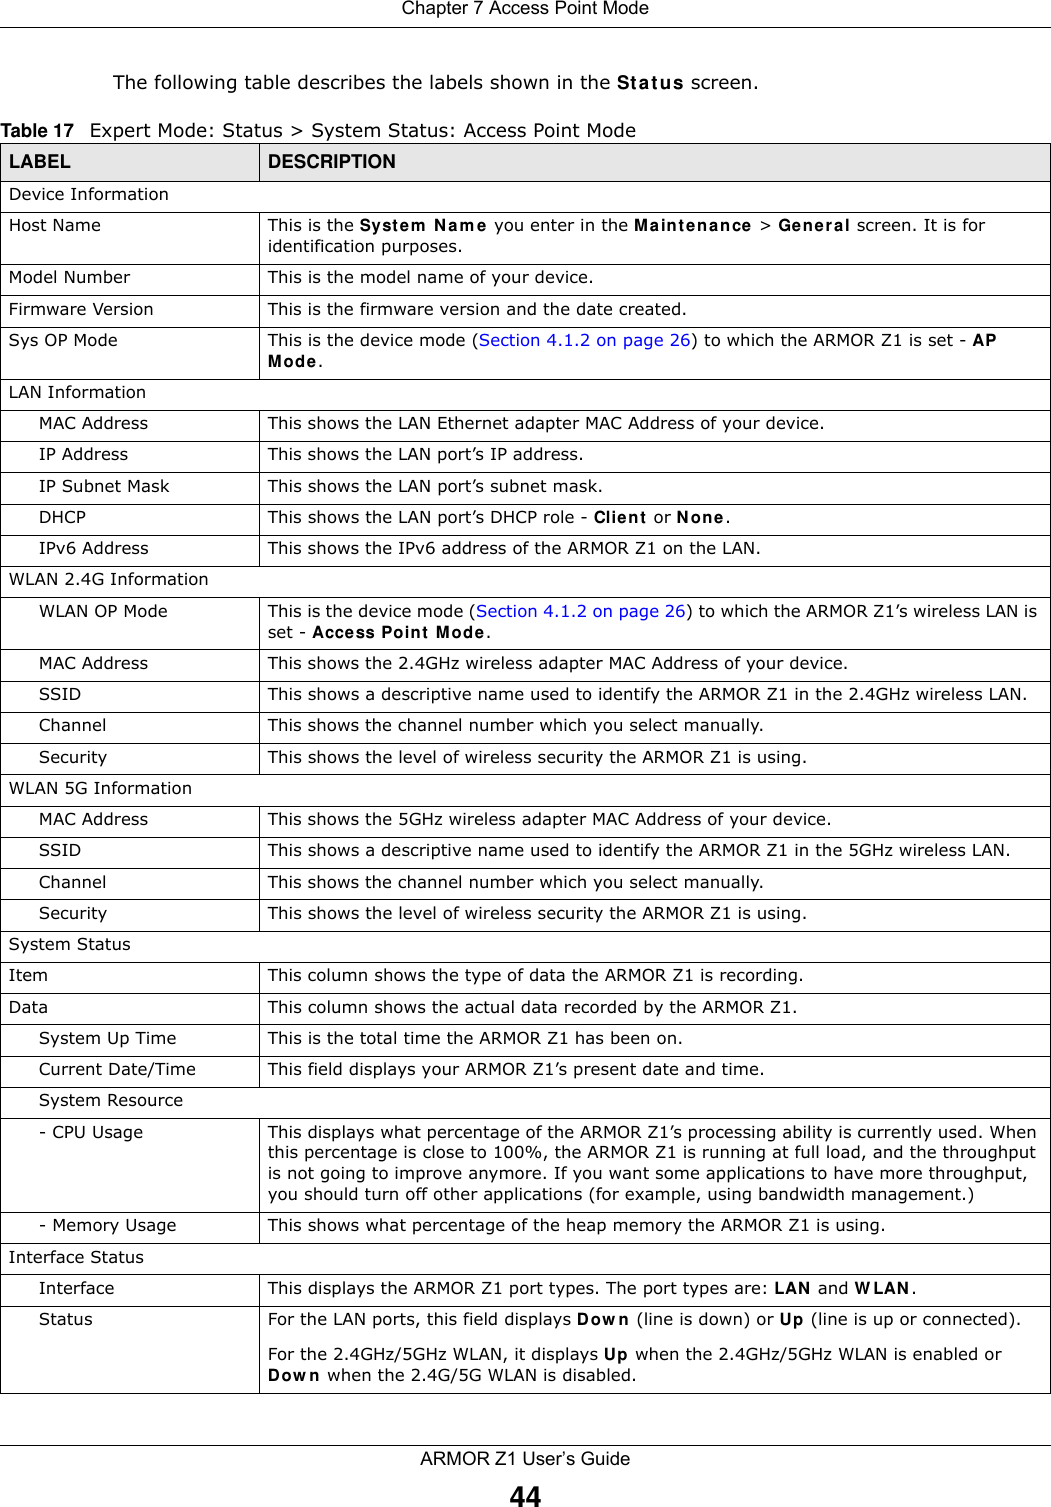 Chapter 7 Access Point ModeARMOR Z1 User’s Guide44The following table describes the labels shown in the Status screen.  Table 17   Expert Mode: Status &gt; System Status: Access Point Mode  LABEL DESCRIPTIONDevice InformationHost Name This is the System Name you enter in the Maintenance &gt; General screen. It is for identification purposes.Model Number This is the model name of your device.Firmware Version This is the firmware version and the date created. Sys OP Mode This is the device mode (Section 4.1.2 on page 26) to which the ARMOR Z1 is set - AP Mode.LAN InformationMAC Address This shows the LAN Ethernet adapter MAC Address of your device.IP Address This shows the LAN port’s IP address.IP Subnet Mask This shows the LAN port’s subnet mask.DHCP This shows the LAN port’s DHCP role - Client or None.IPv6 Address This shows the IPv6 address of the ARMOR Z1 on the LAN.WLAN 2.4G InformationWLAN OP Mode This is the device mode (Section 4.1.2 on page 26) to which the ARMOR Z1’s wireless LAN is set - Access Point Mode.MAC Address This shows the 2.4GHz wireless adapter MAC Address of your device.SSID This shows a descriptive name used to identify the ARMOR Z1 in the 2.4GHz wireless LAN. Channel This shows the channel number which you select manually.Security This shows the level of wireless security the ARMOR Z1 is using.WLAN 5G InformationMAC Address This shows the 5GHz wireless adapter MAC Address of your device.SSID This shows a descriptive name used to identify the ARMOR Z1 in the 5GHz wireless LAN. Channel This shows the channel number which you select manually.Security This shows the level of wireless security the ARMOR Z1 is using.System StatusItem This column shows the type of data the ARMOR Z1 is recording.Data This column shows the actual data recorded by the ARMOR Z1.System Up Time This is the total time the ARMOR Z1 has been on.Current Date/Time This field displays your ARMOR Z1’s present date and time.System Resource- CPU Usage This displays what percentage of the ARMOR Z1’s processing ability is currently used. When this percentage is close to 100%, the ARMOR Z1 is running at full load, and the throughput is not going to improve anymore. If you want some applications to have more throughput, you should turn off other applications (for example, using bandwidth management.)- Memory Usage This shows what percentage of the heap memory the ARMOR Z1 is using. Interface StatusInterface This displays the ARMOR Z1 port types. The port types are: LAN and WLAN.Status For the LAN ports, this field displays Down (line is down) or Up (line is up or connected).For the 2.4GHz/5GHz WLAN, it displays Up when the 2.4GHz/5GHz WLAN is enabled or Down when the 2.4G/5G WLAN is disabled.